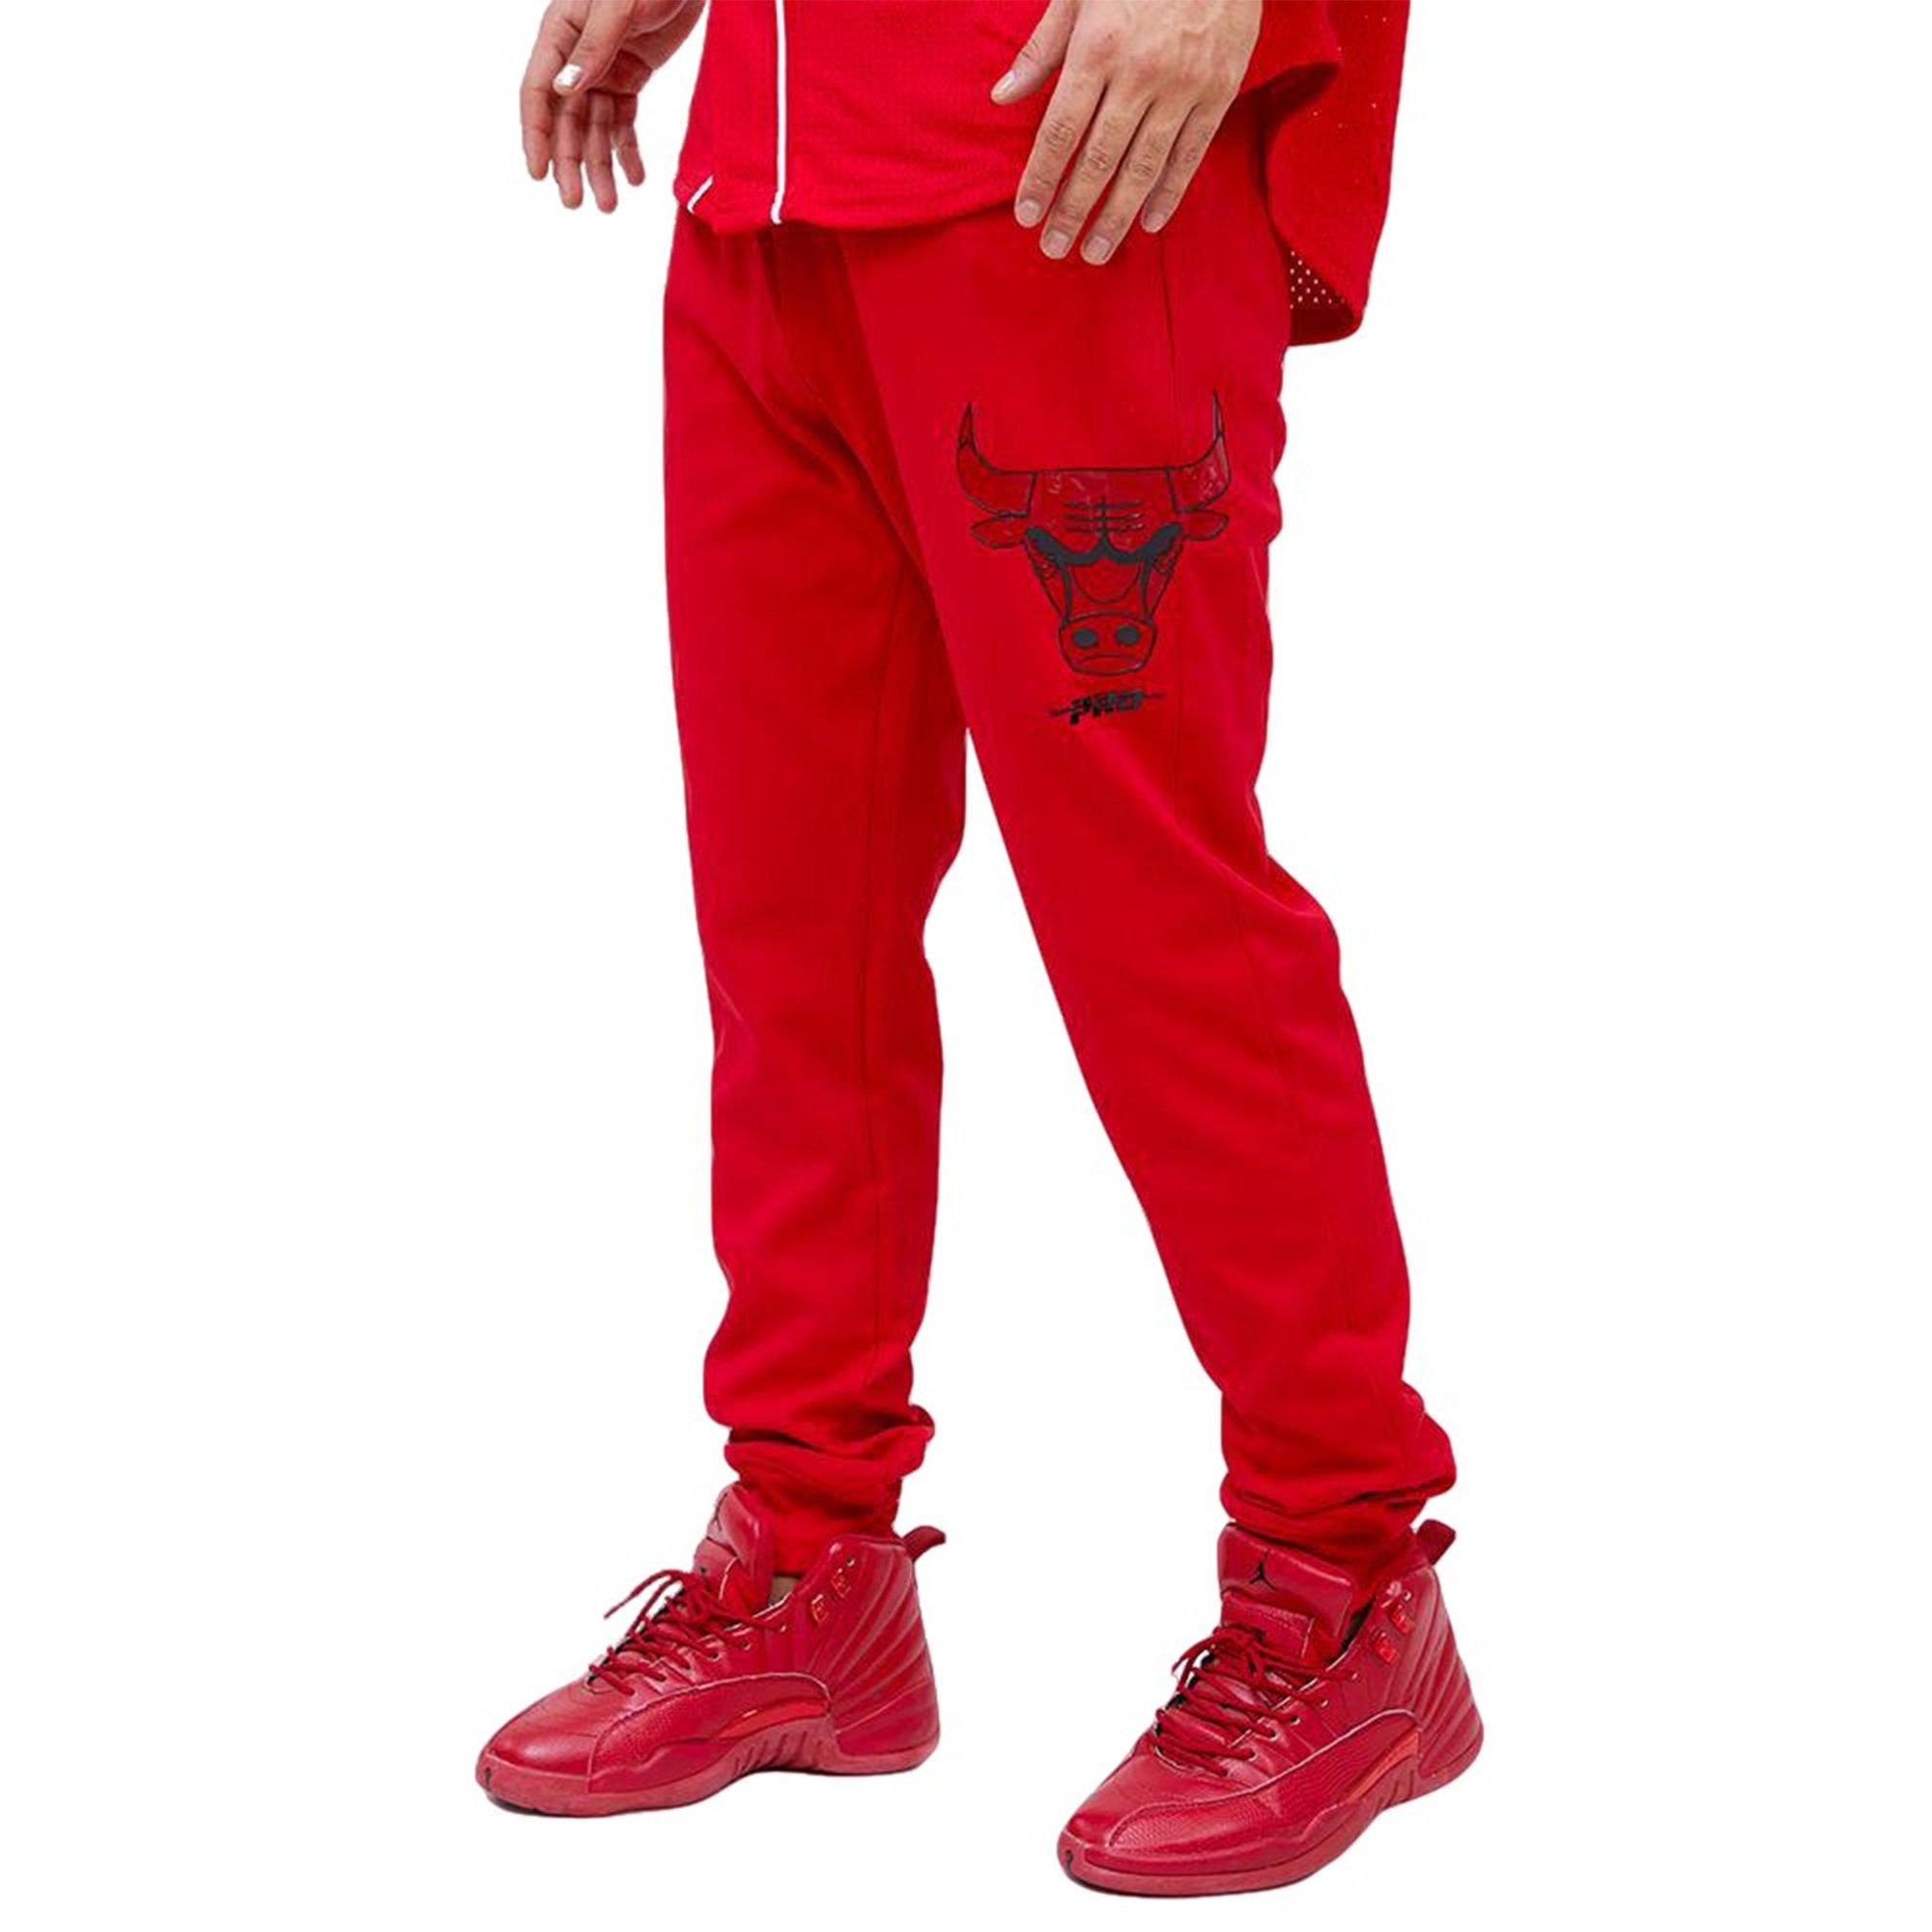 Bottoms, Vintage Early 9s Chicago Bulls Sweatpants